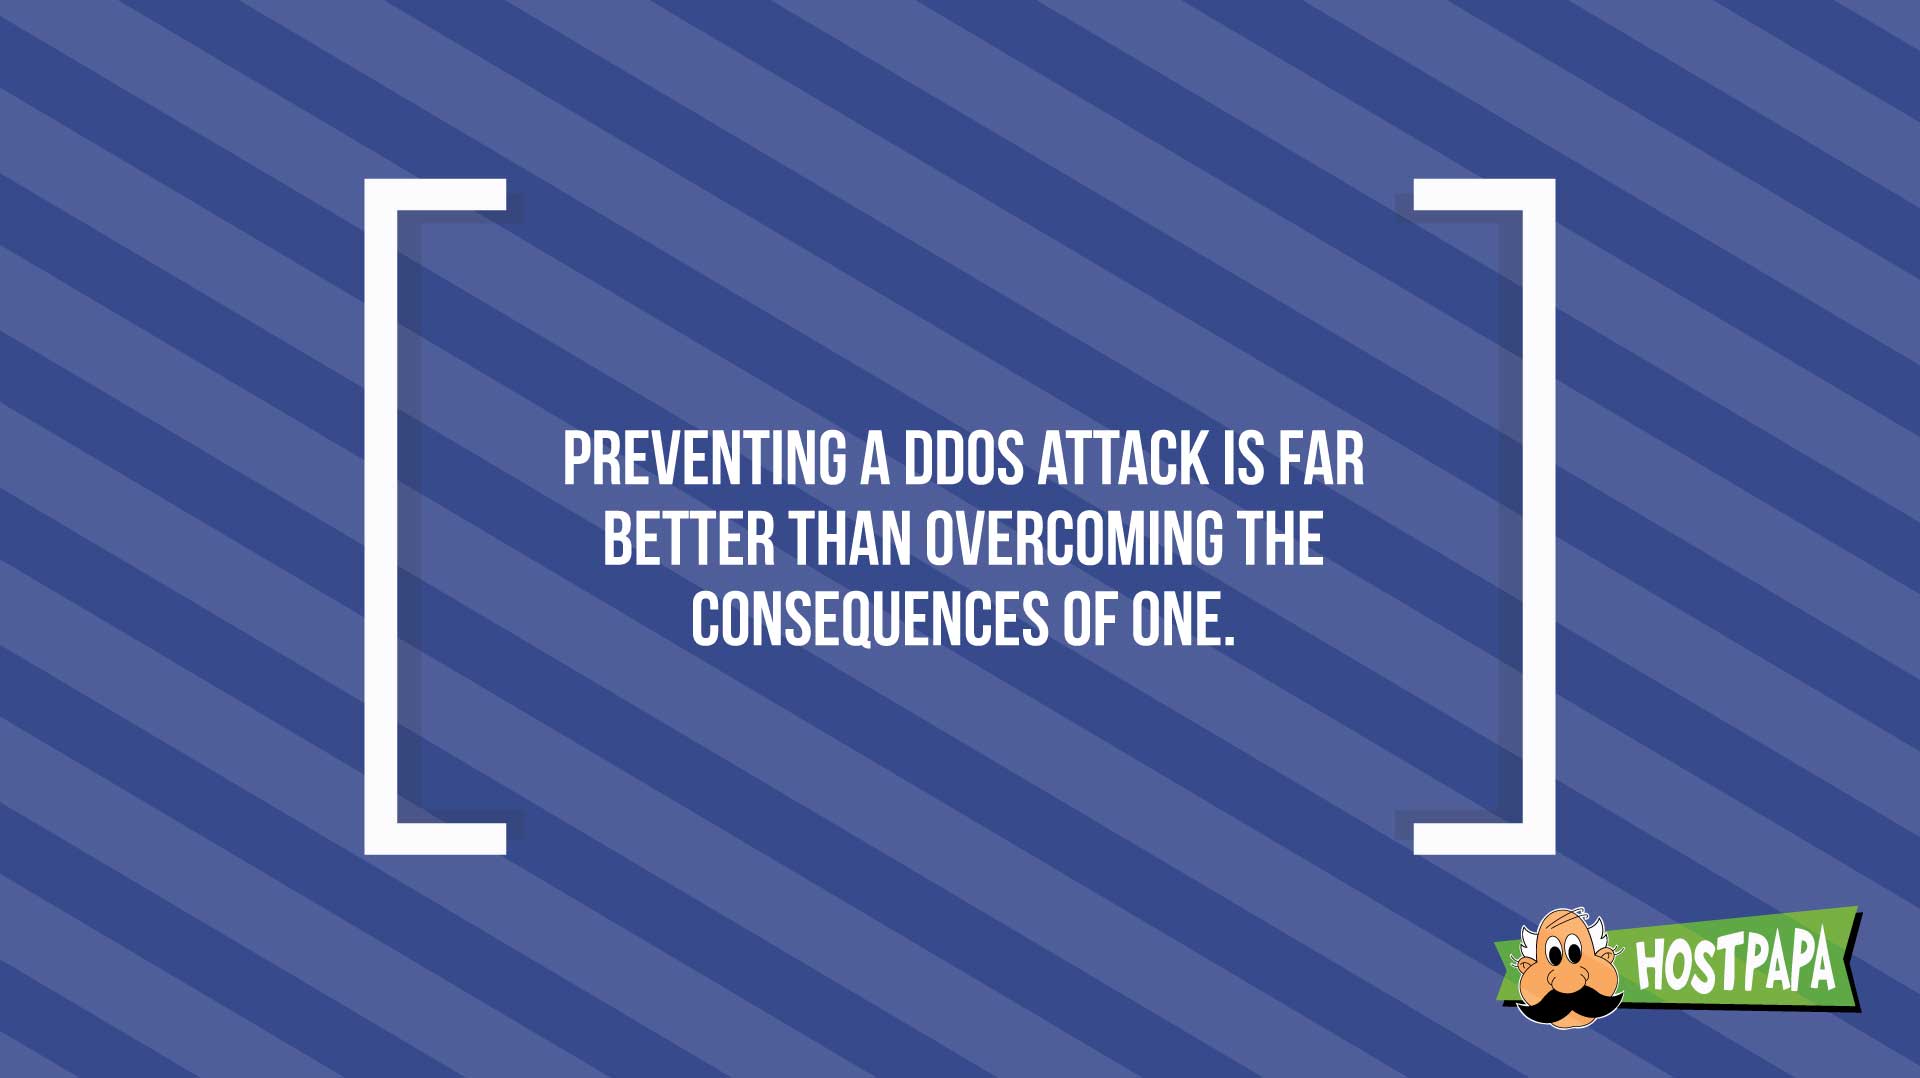 Preventing a DDoS attack is far better than overcoming the consequences of one